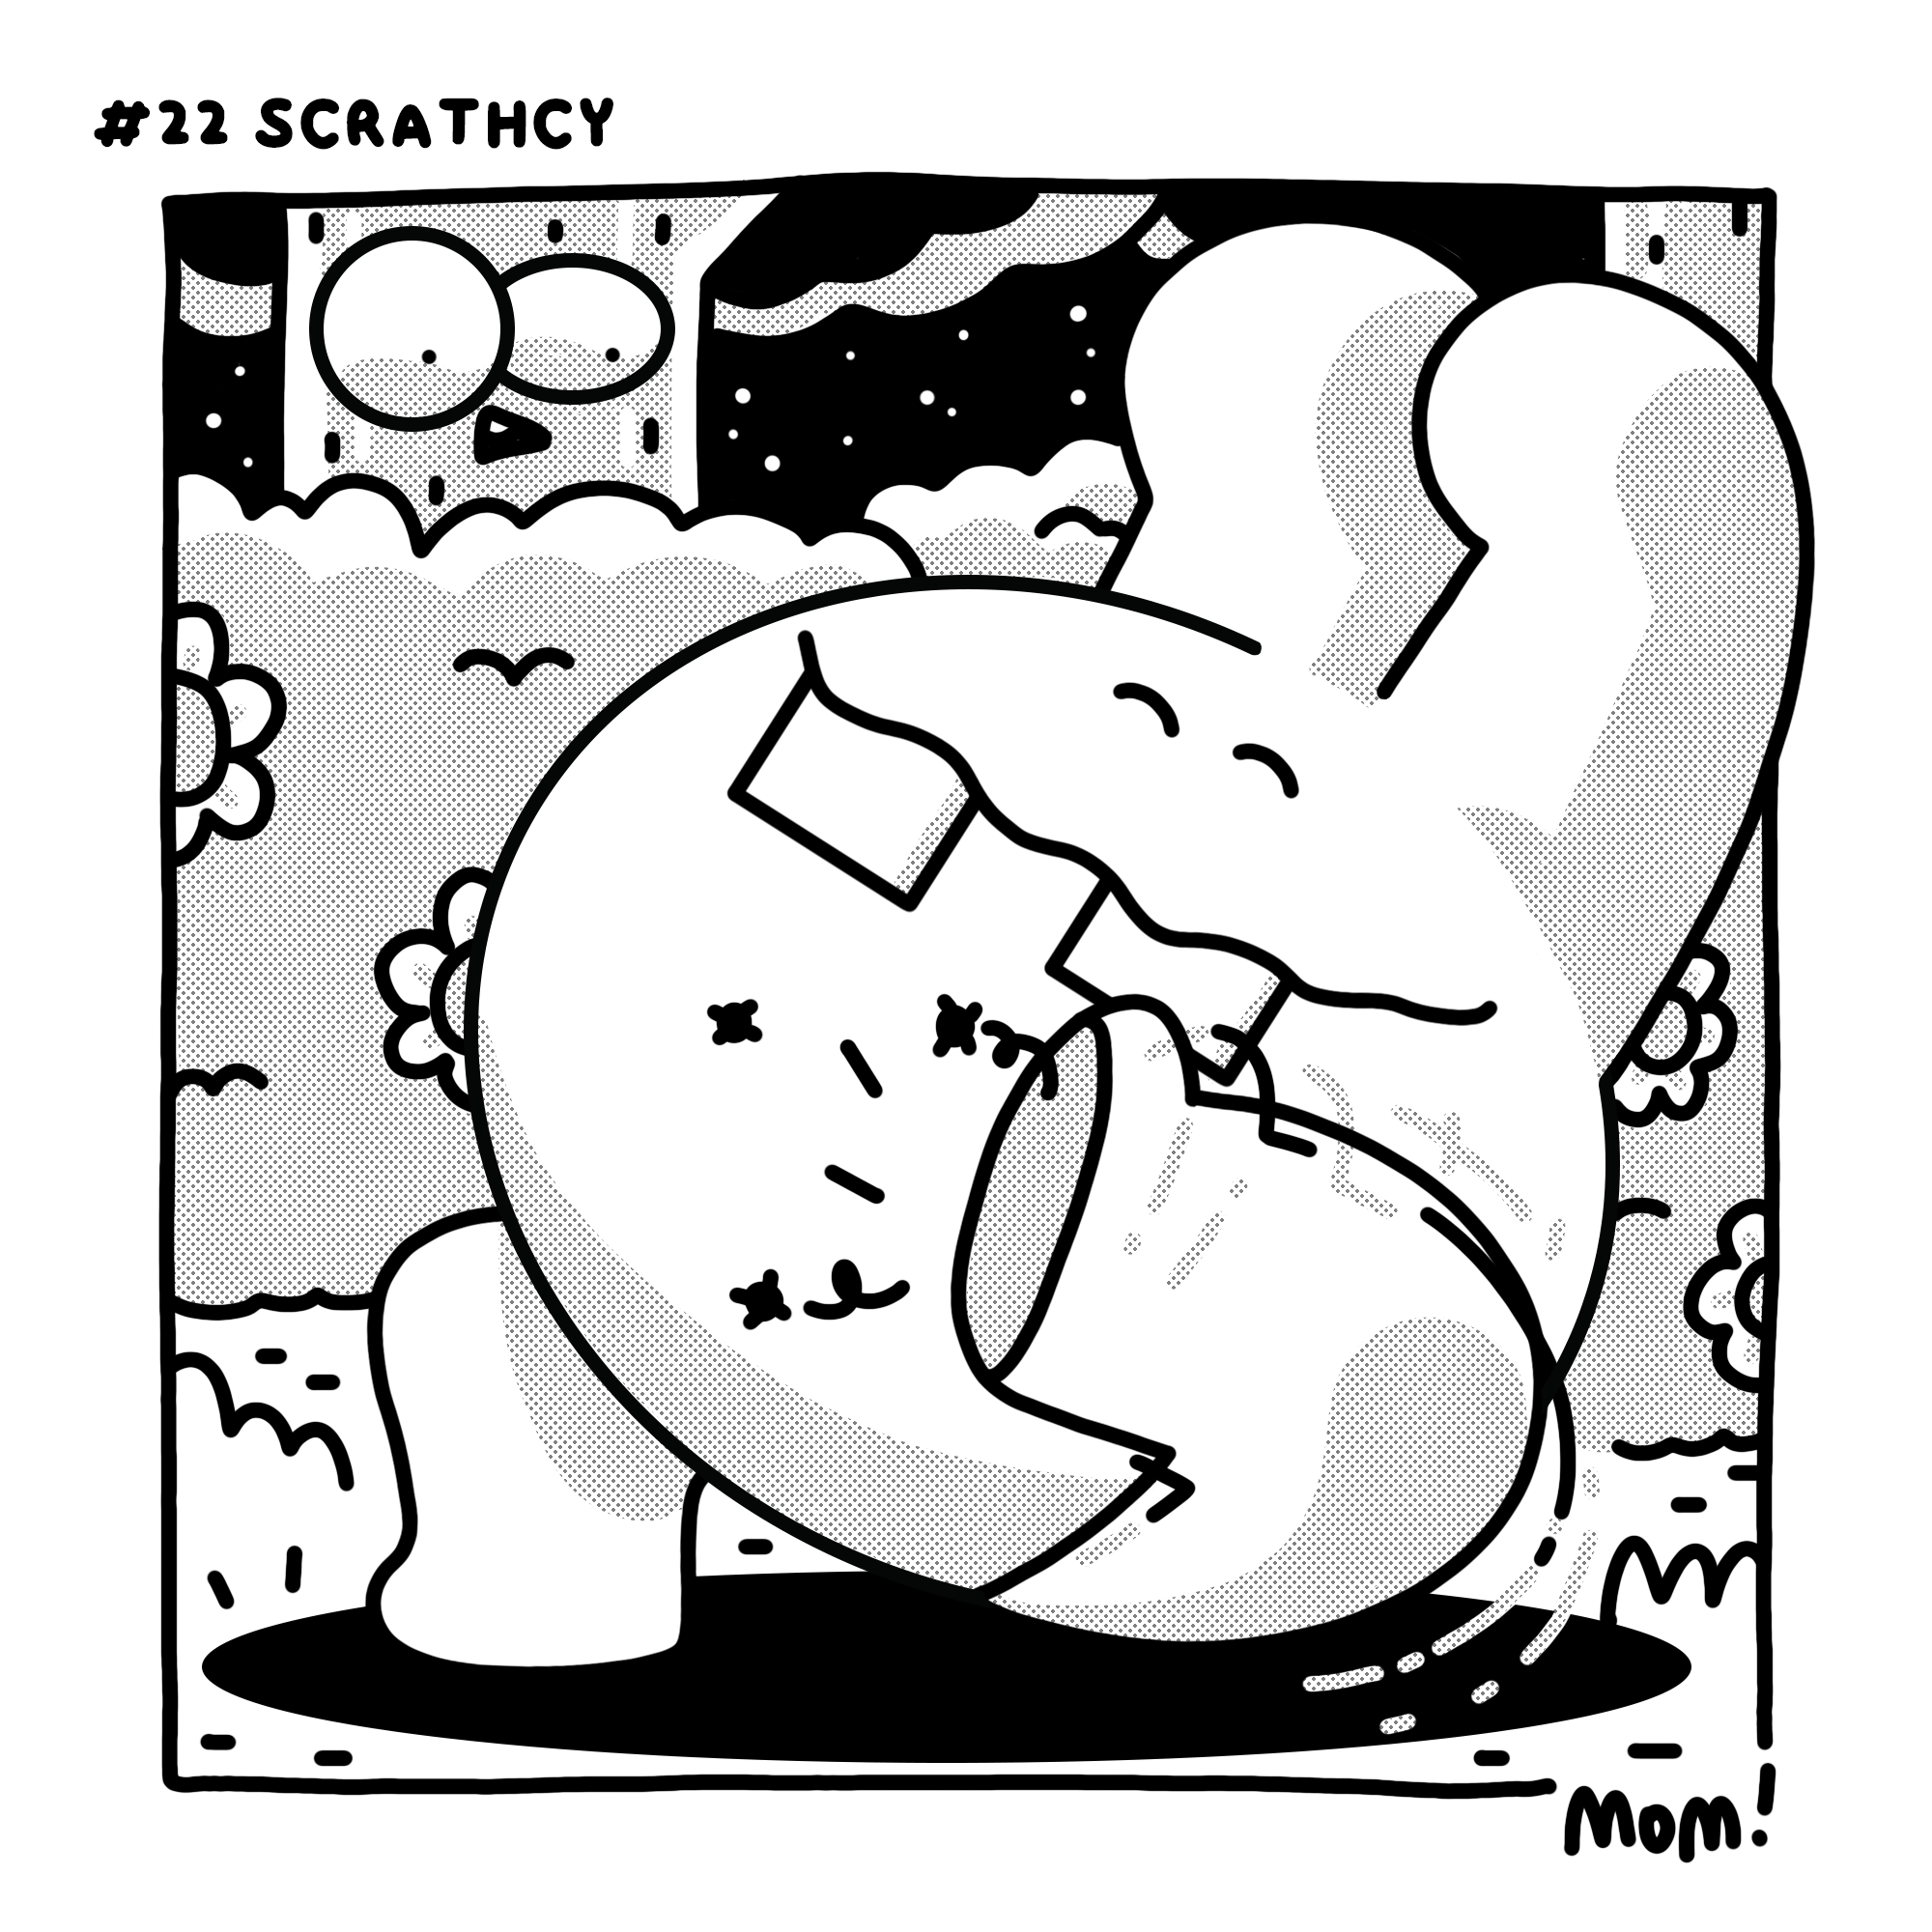 22-Scratchy.png